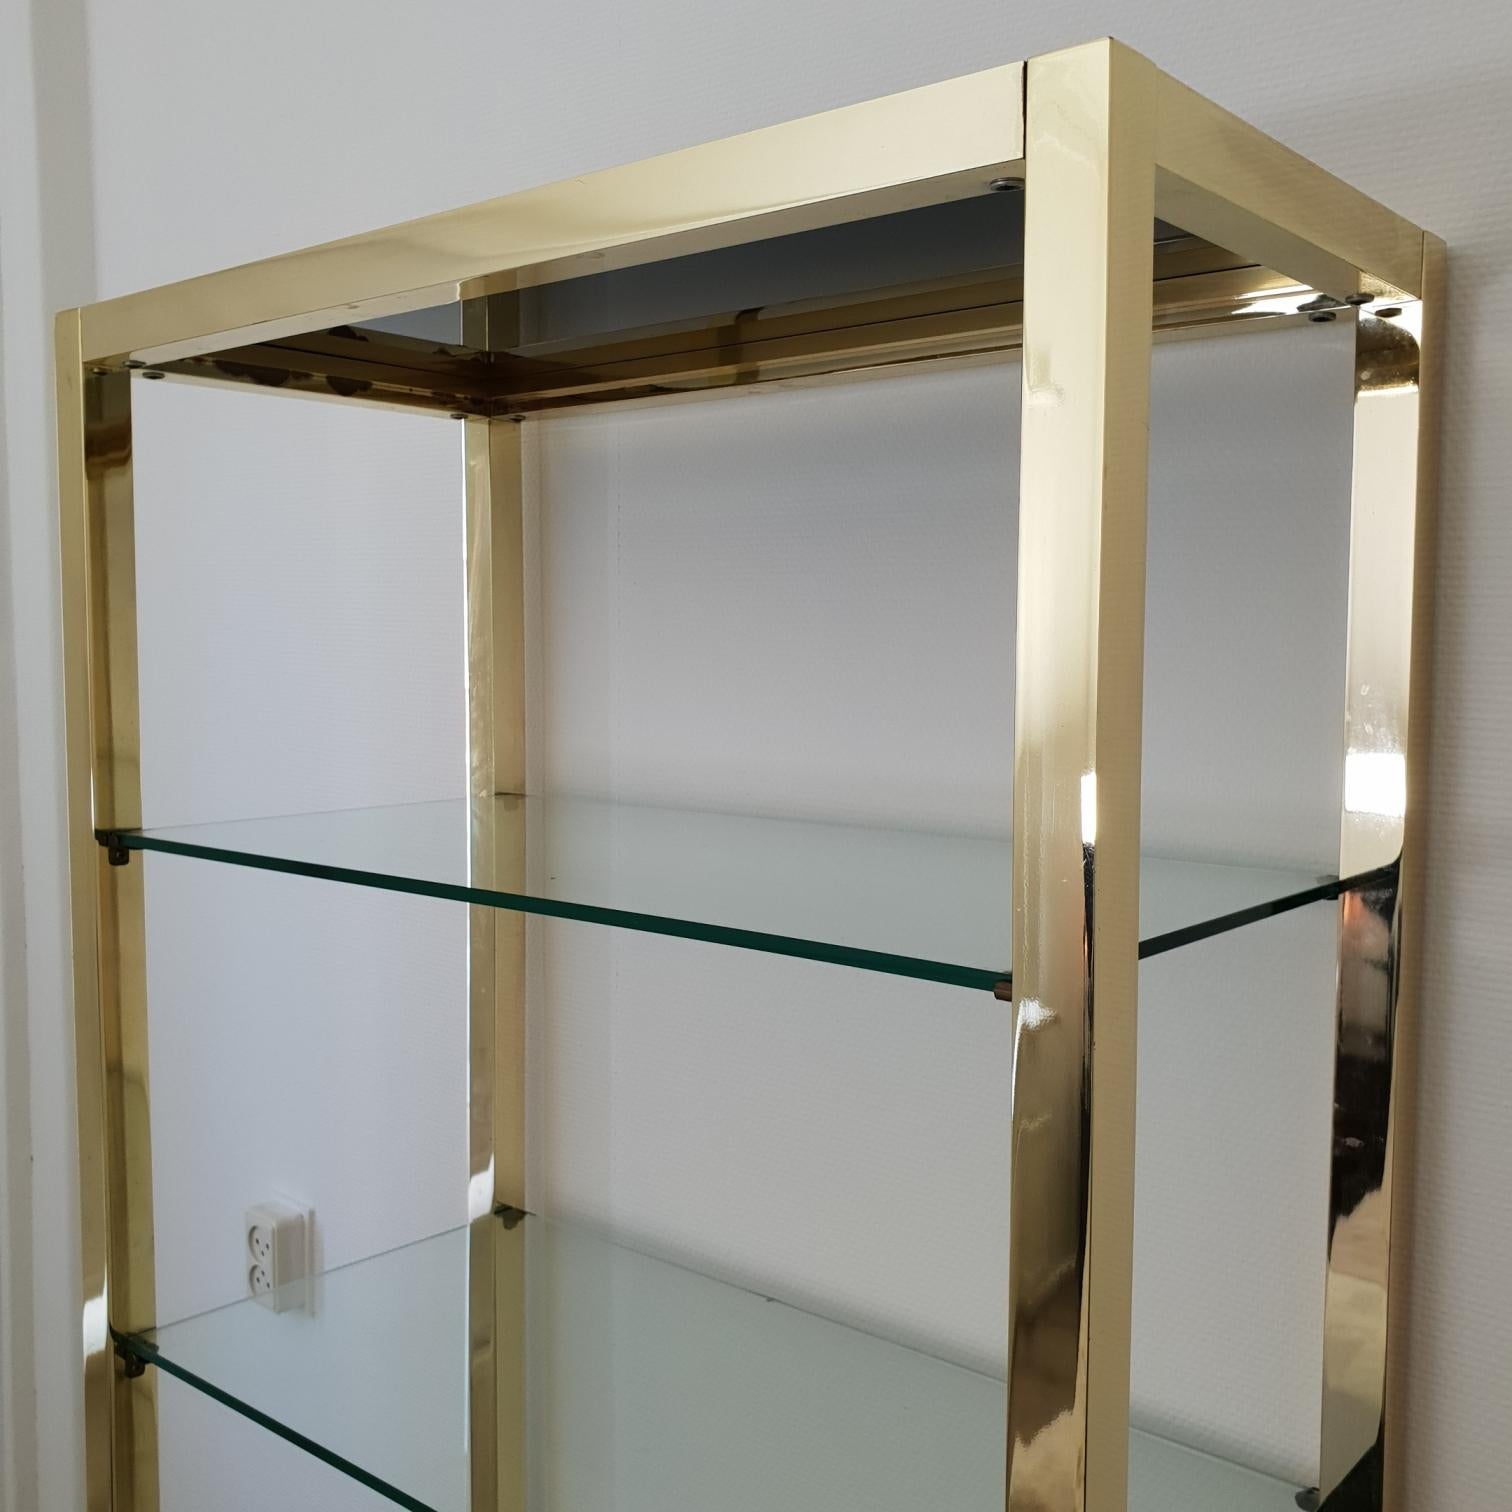 Italian Mid-Century Modern Gold Plated Shelving Unit Étagère, 1970s For Sale 4